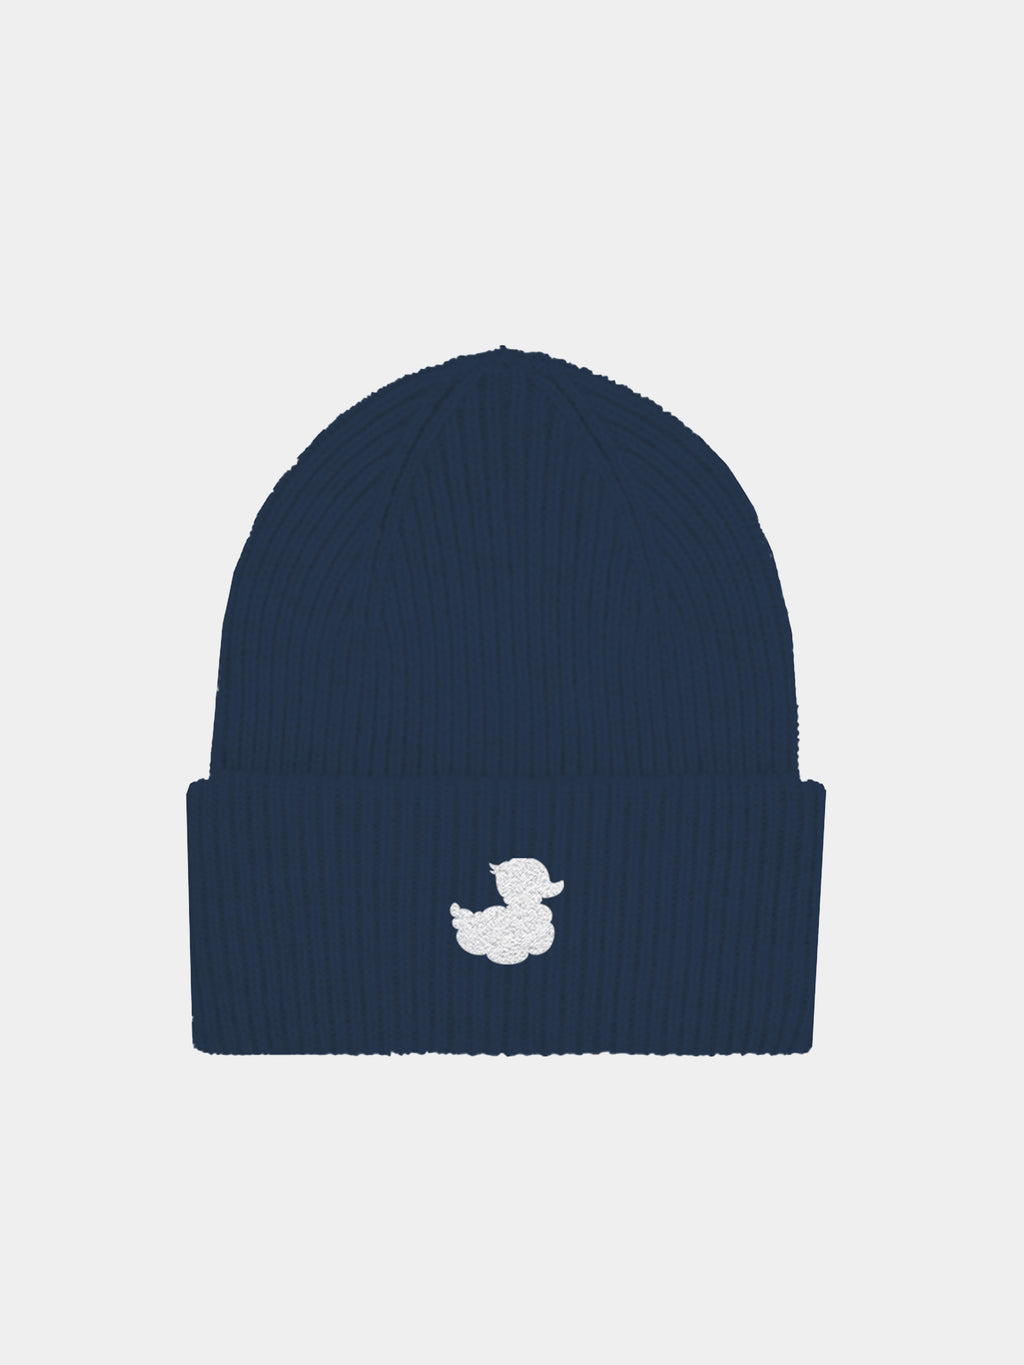 Blue hat for adults with Ducky Clouds